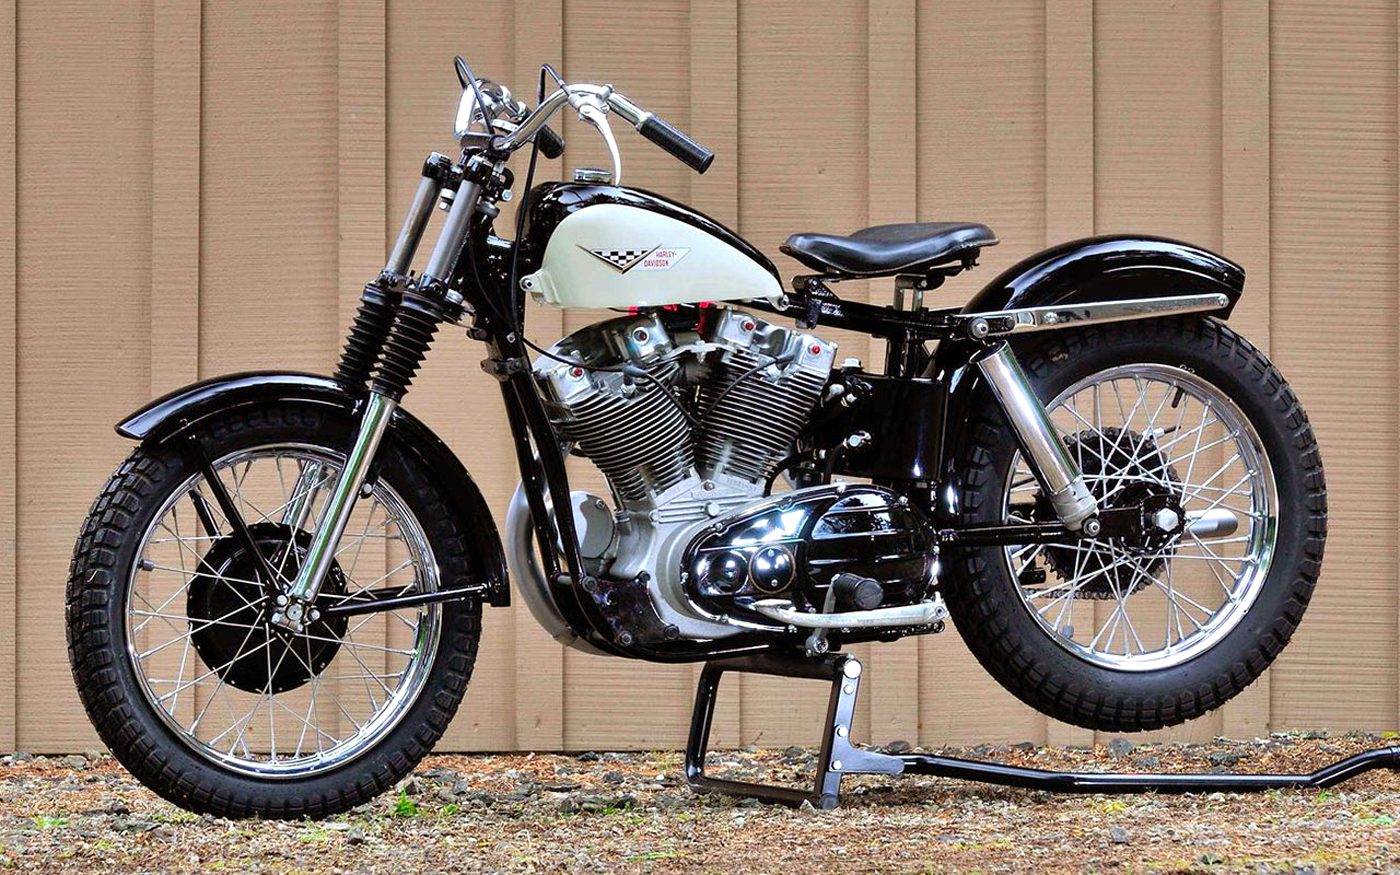 A classic Harley-Davidson Sportster motorcycle from the 1950s is park by a wooden fence in the USA